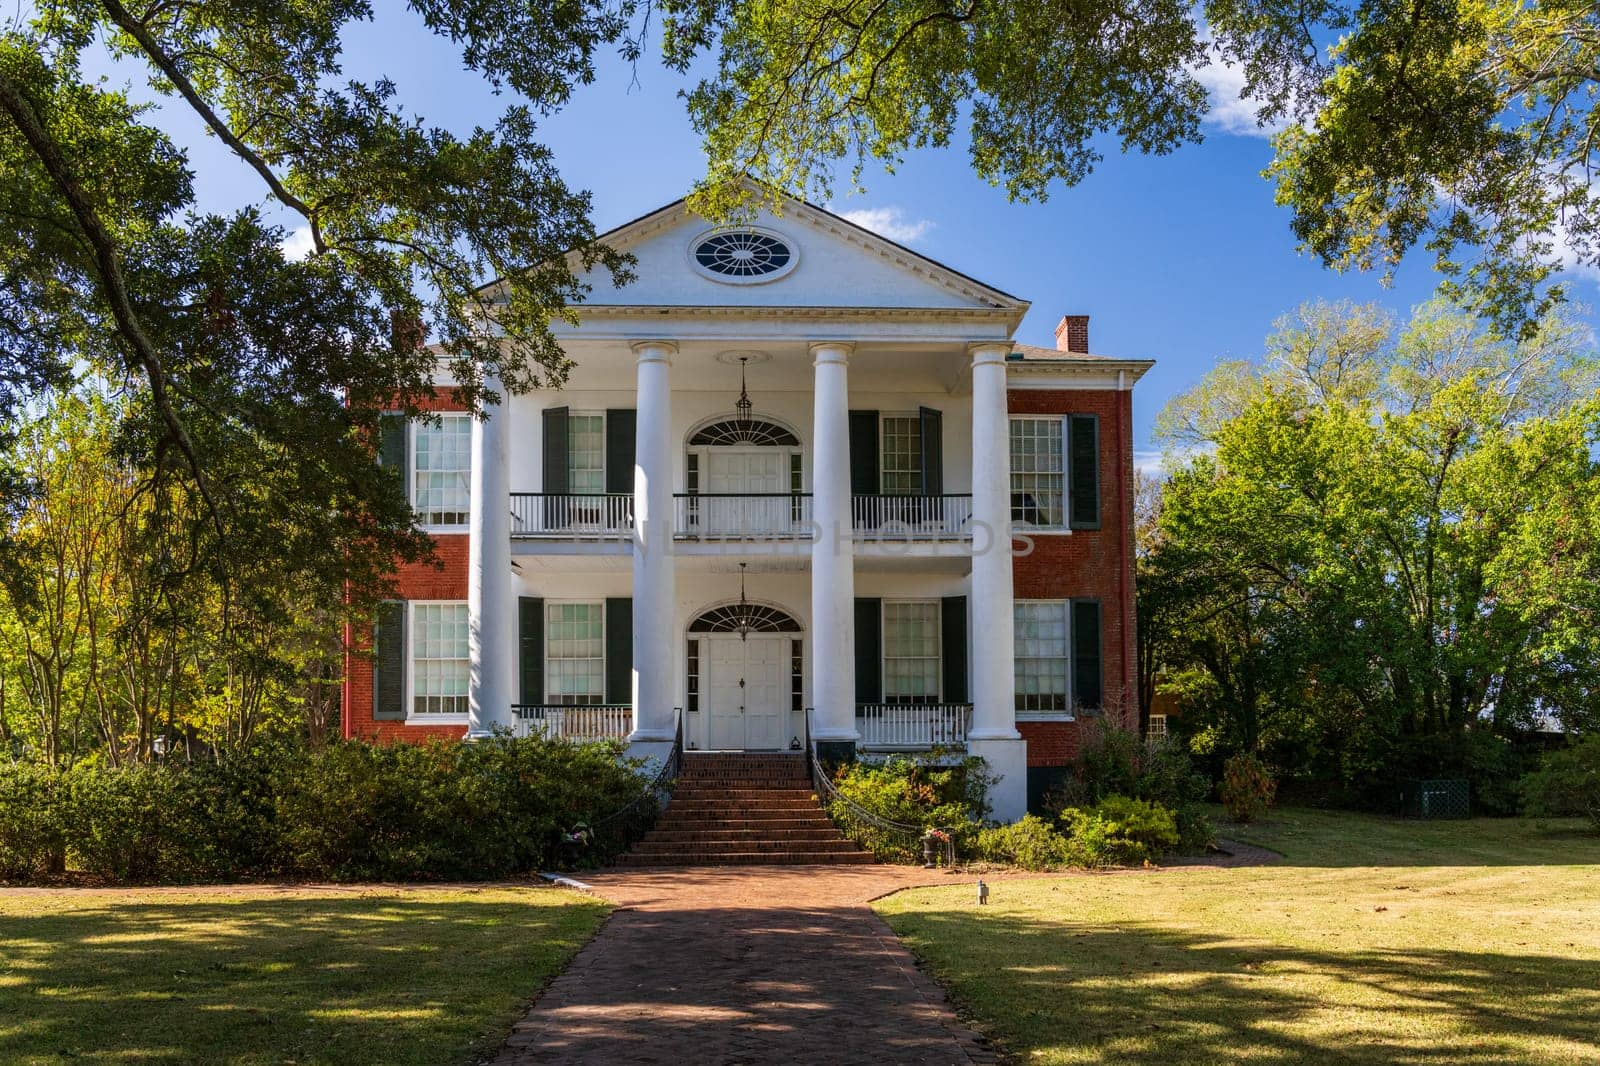 Facade of antebellum home in Natchez in Mississippi by steheap